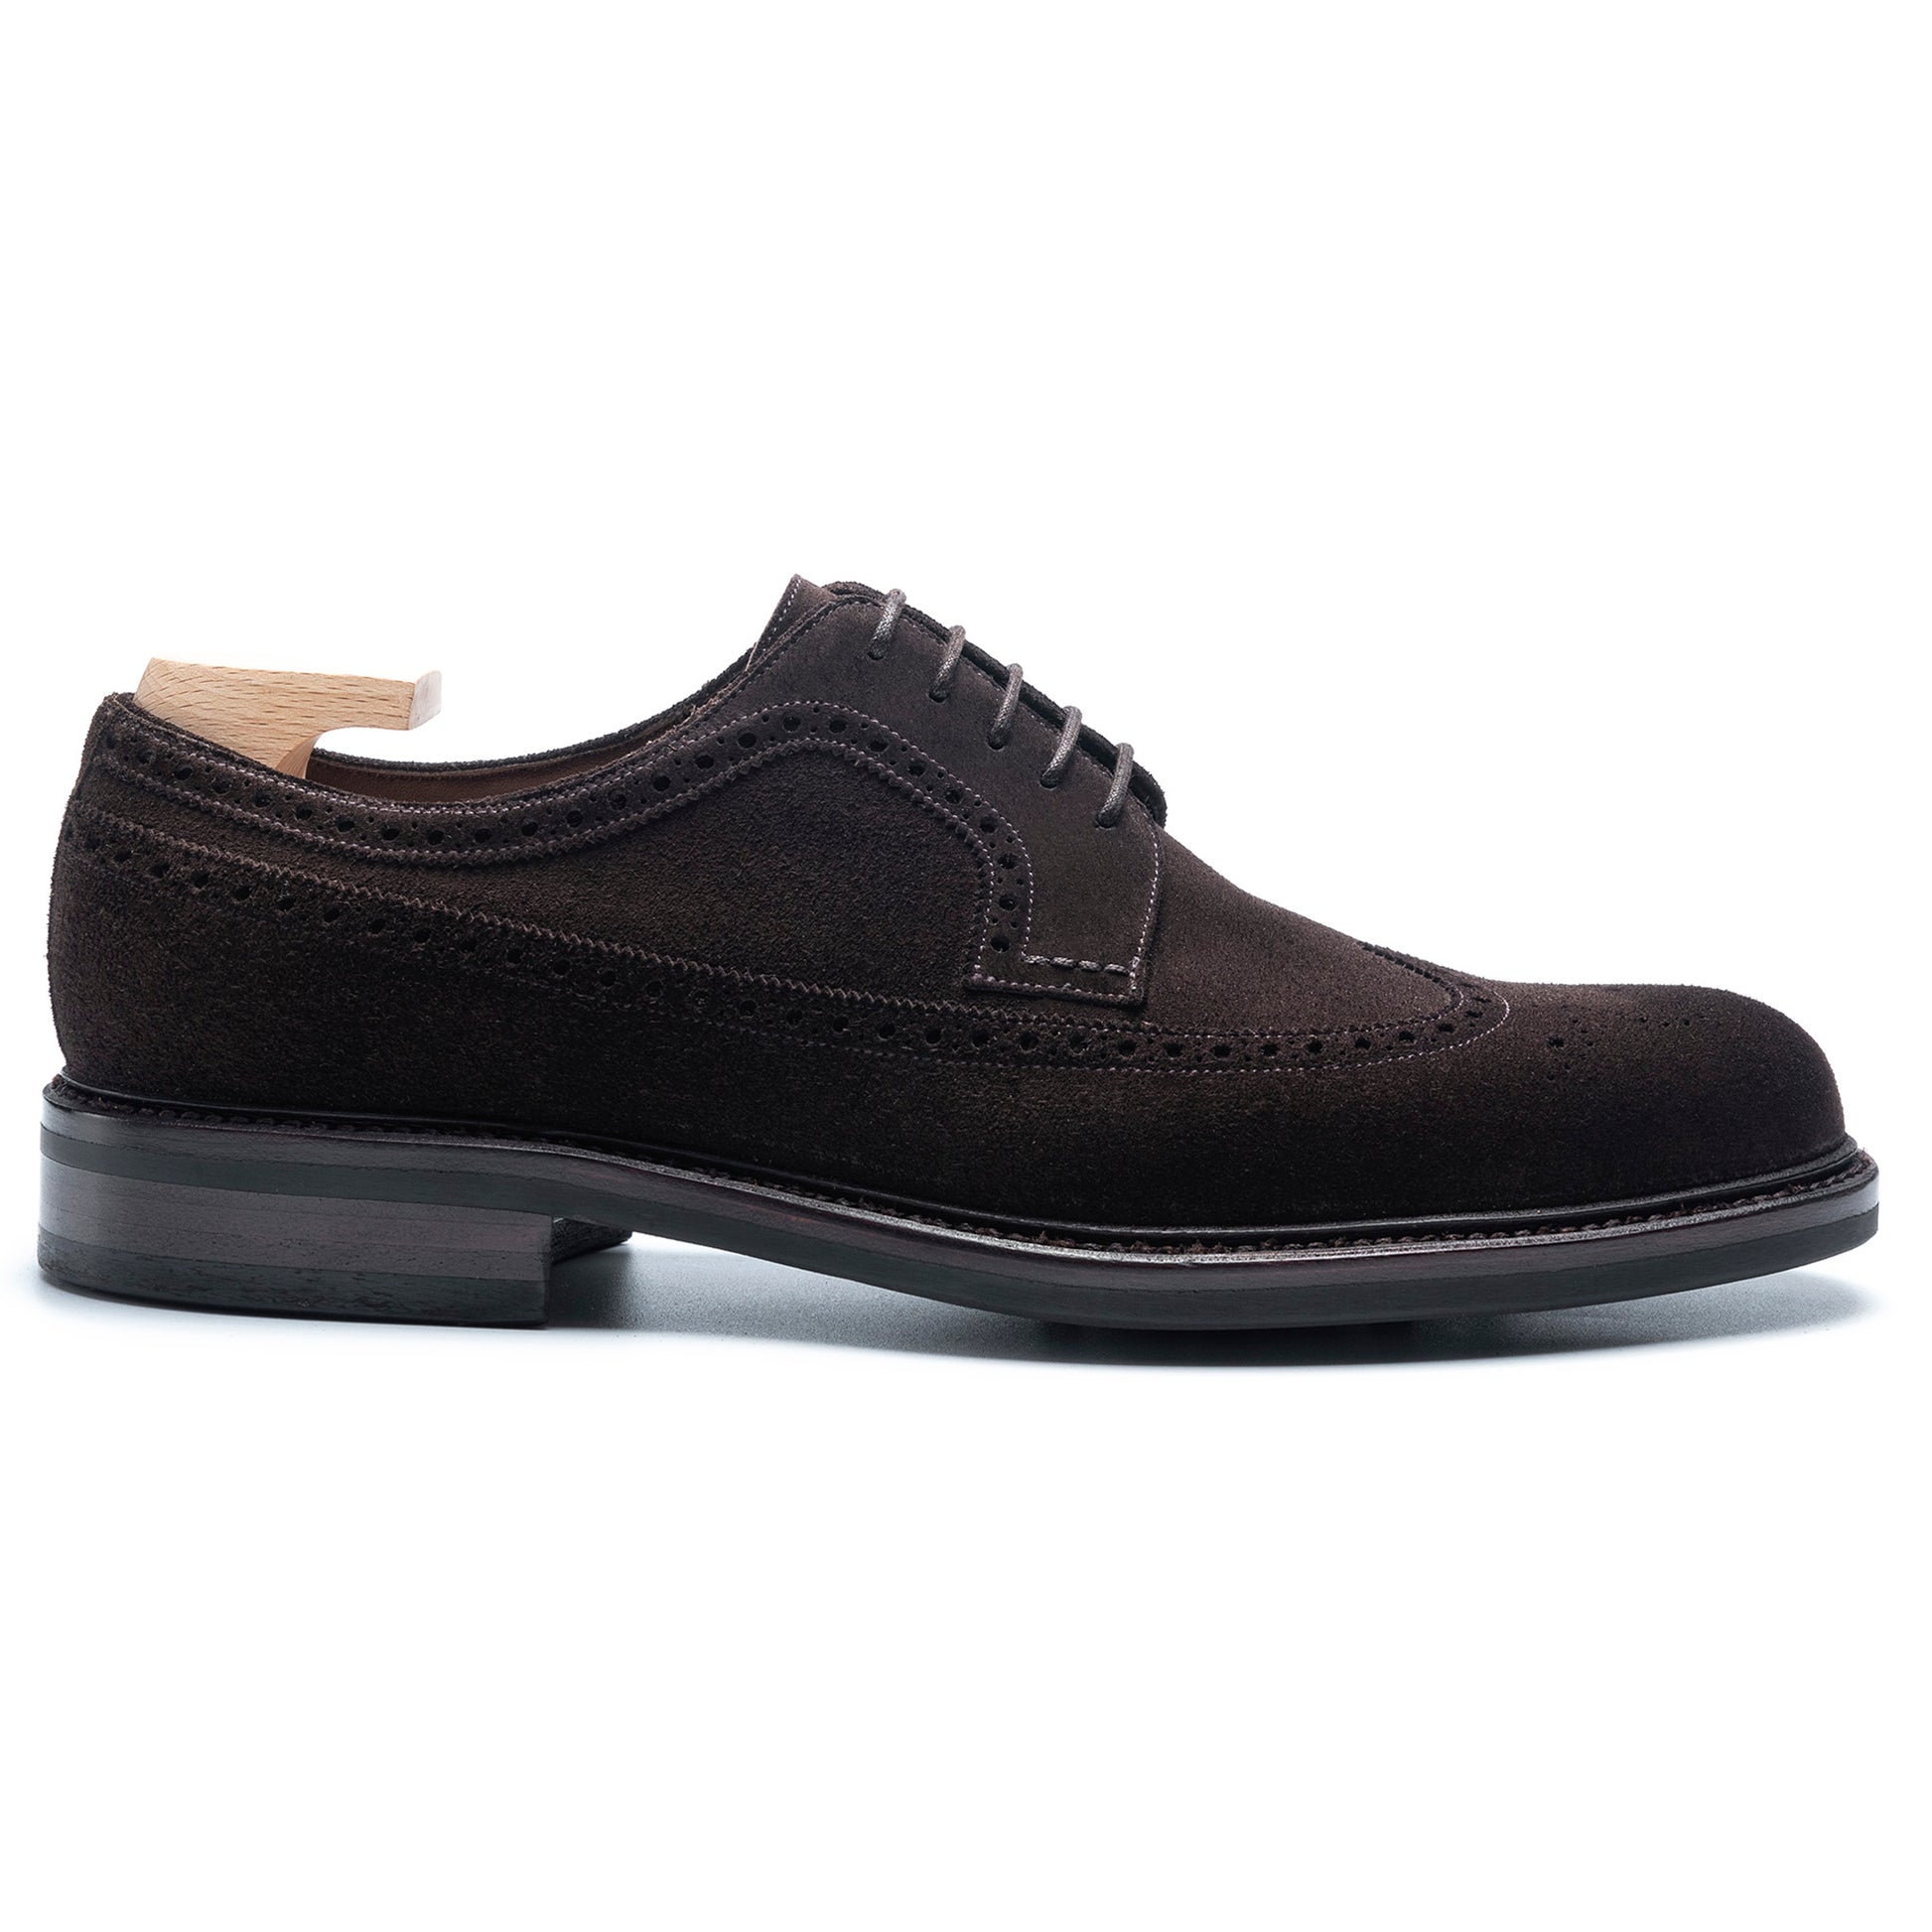 TLB Mallorca leather shoes 677 / MADISON / ANTE BROWN